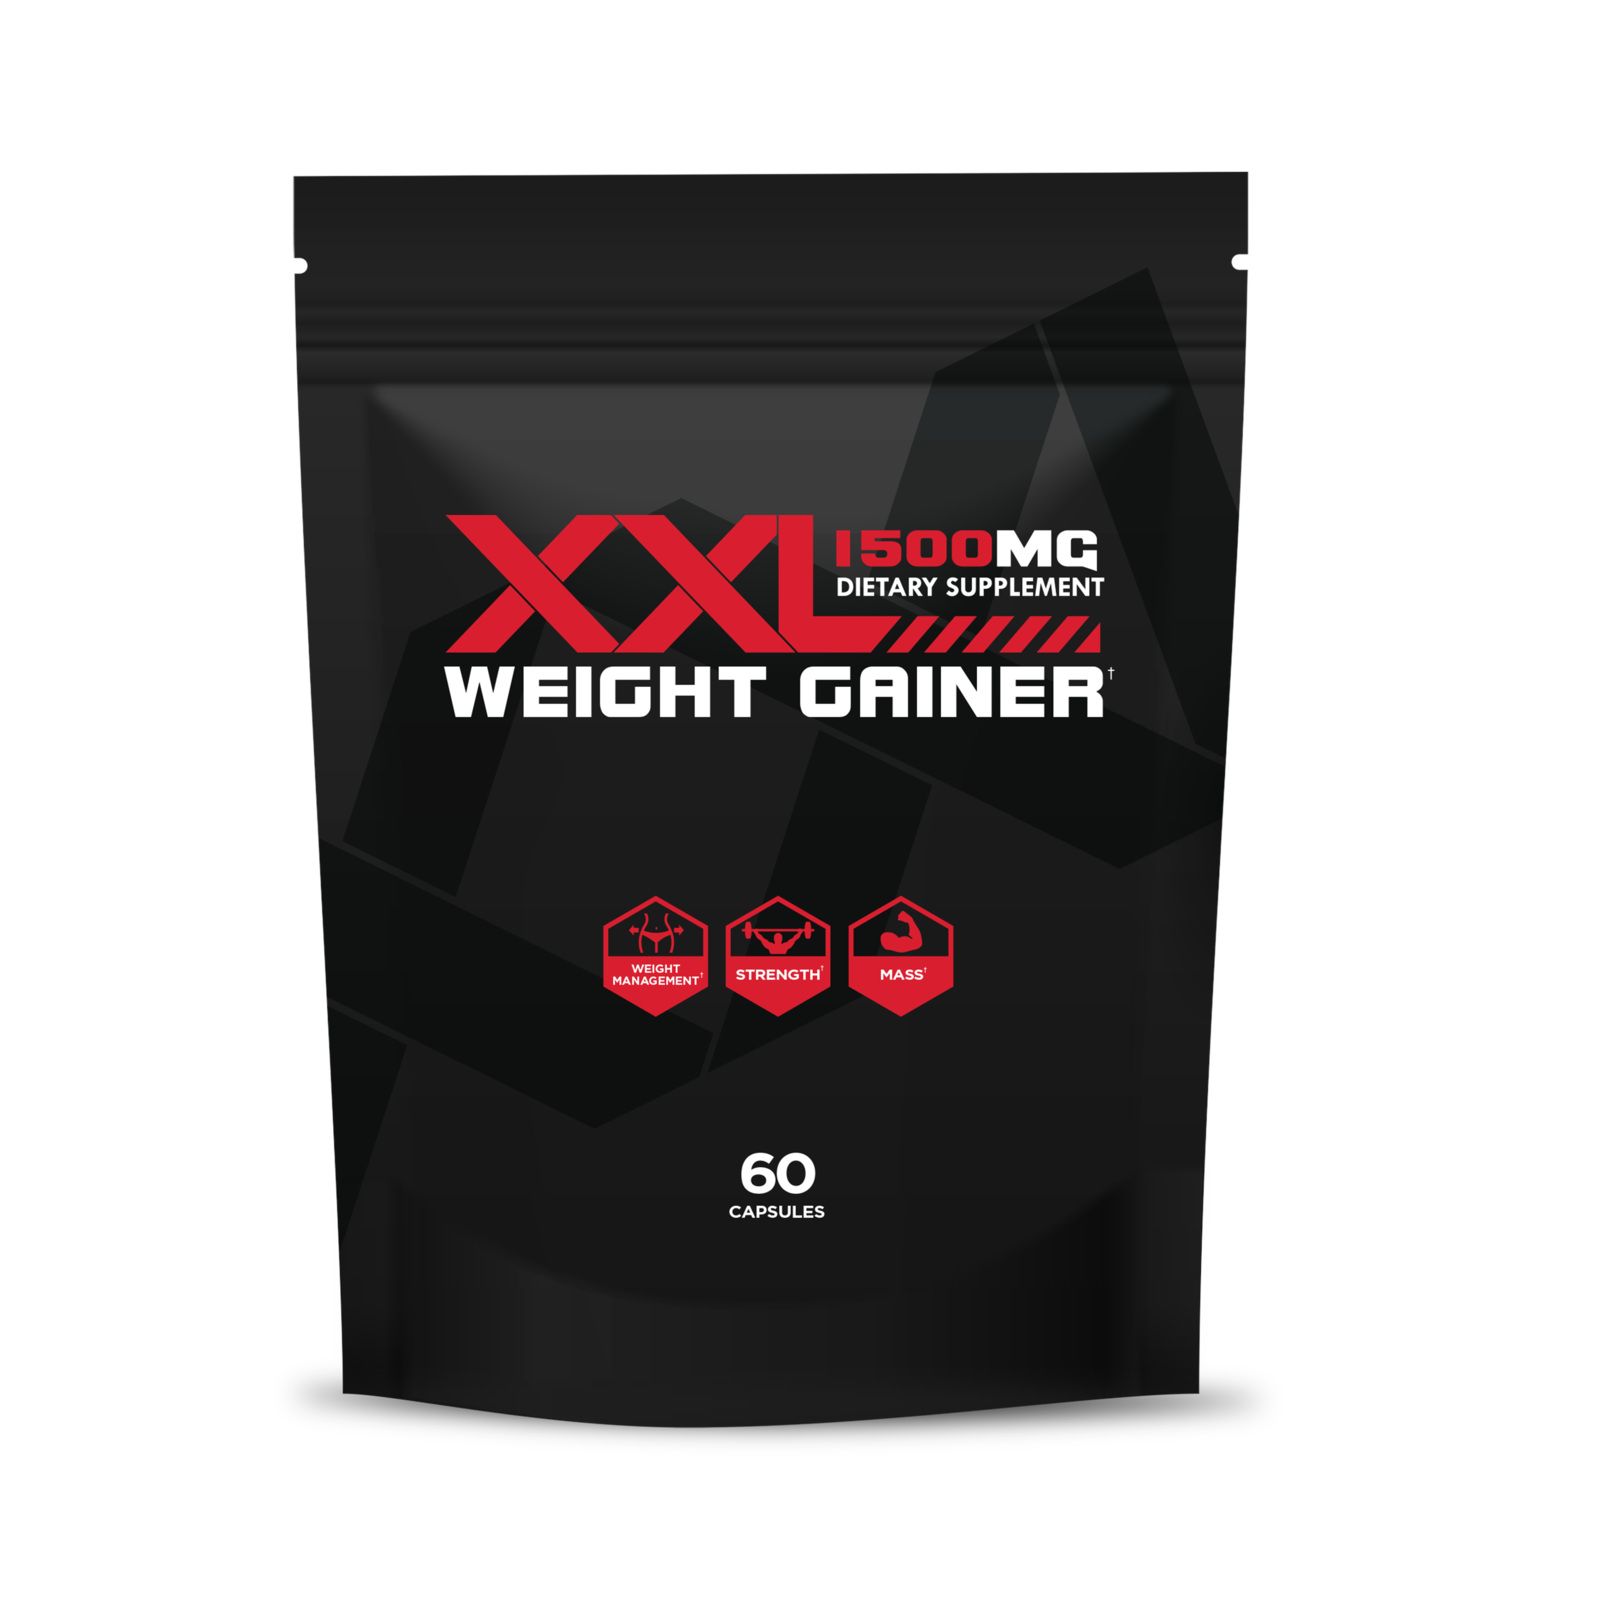 XXL Weight Gainer | Appetite Stimulate Supplement to Gain Weight by Gluteboost™